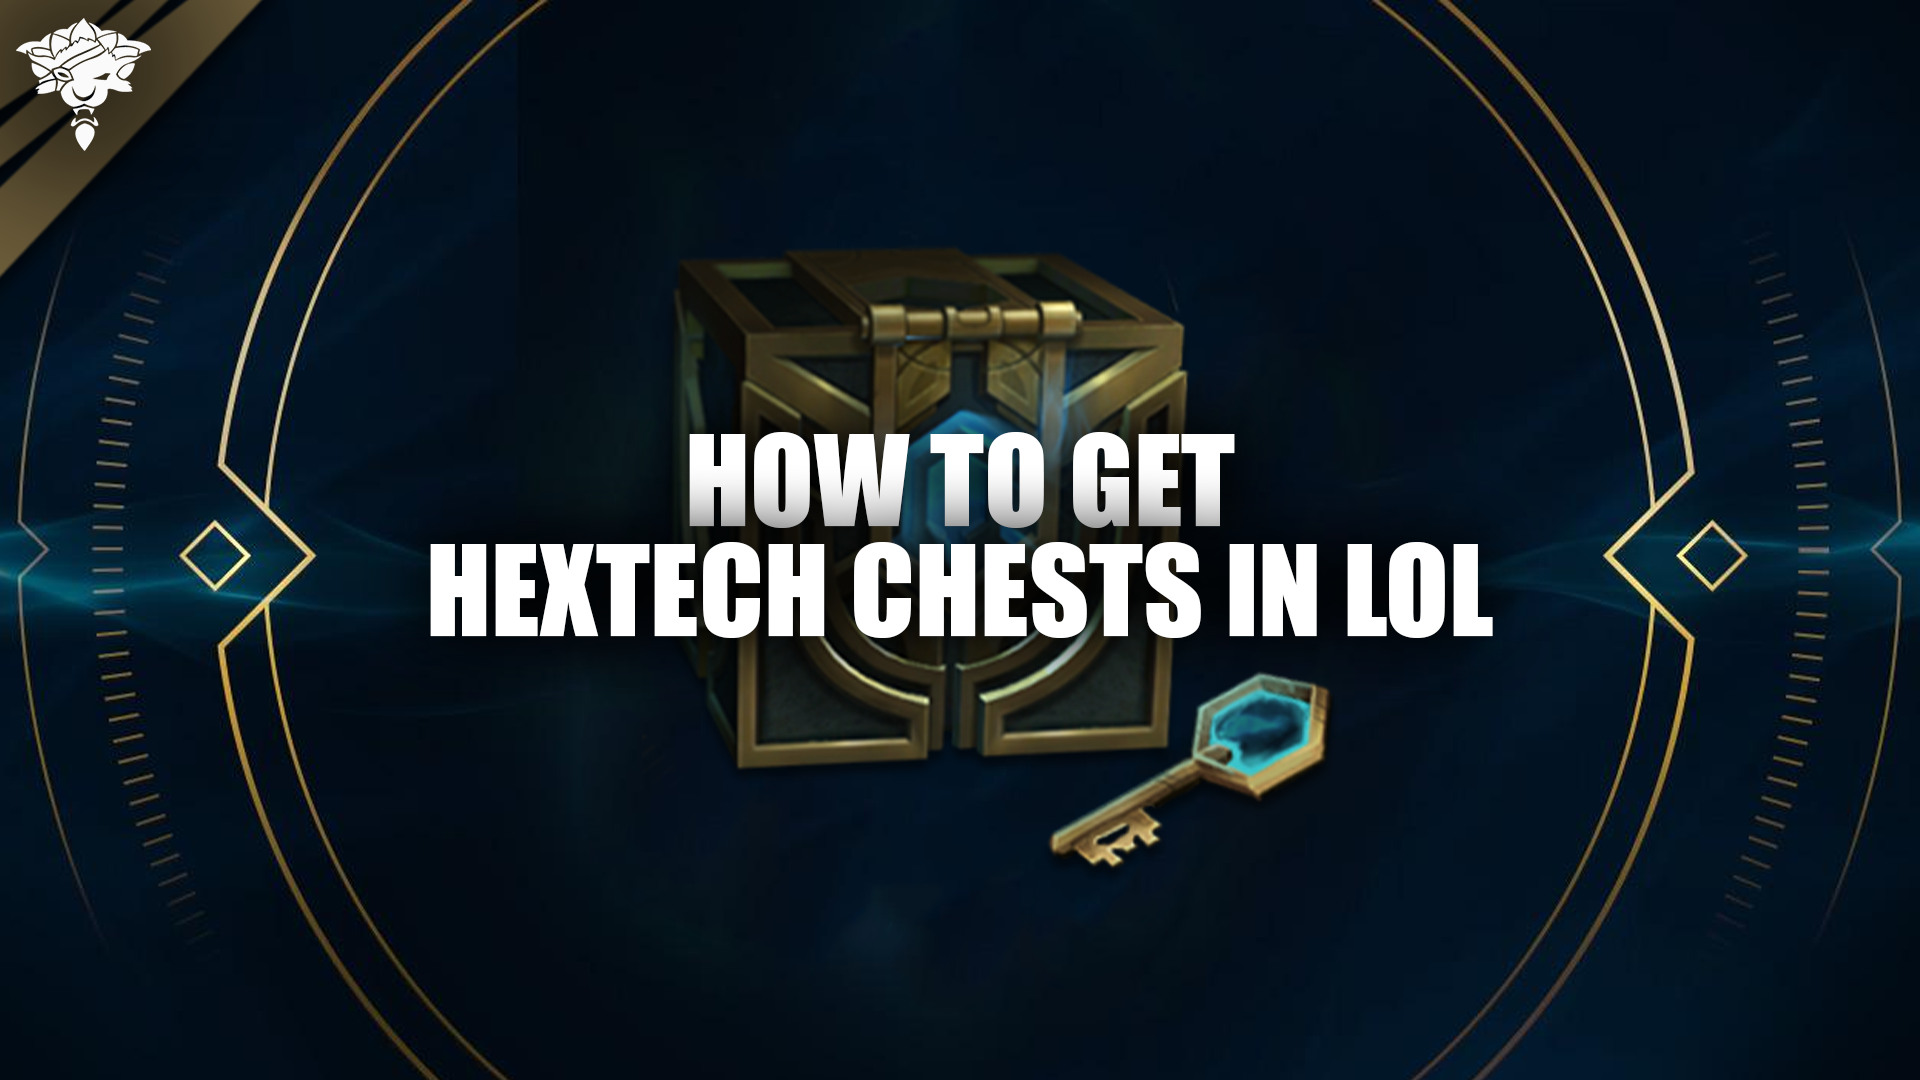 How To Get Hextech Chests in LoL